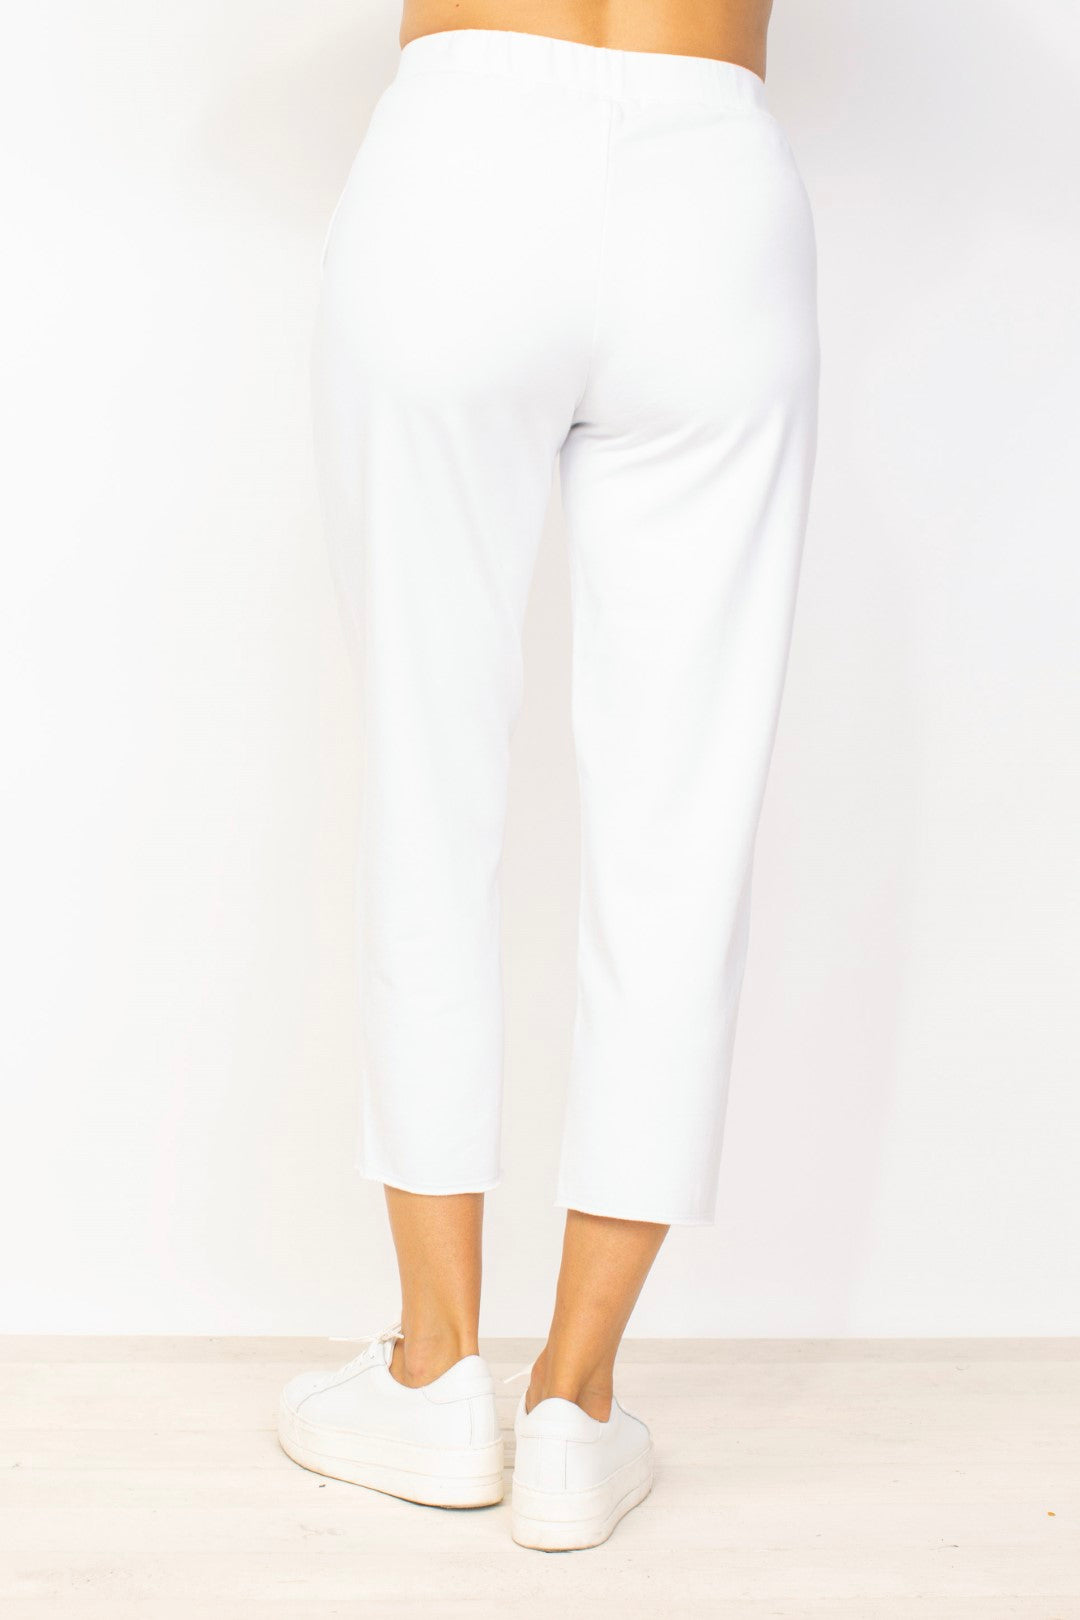 Habitat River-Washed Terry Crop Pants